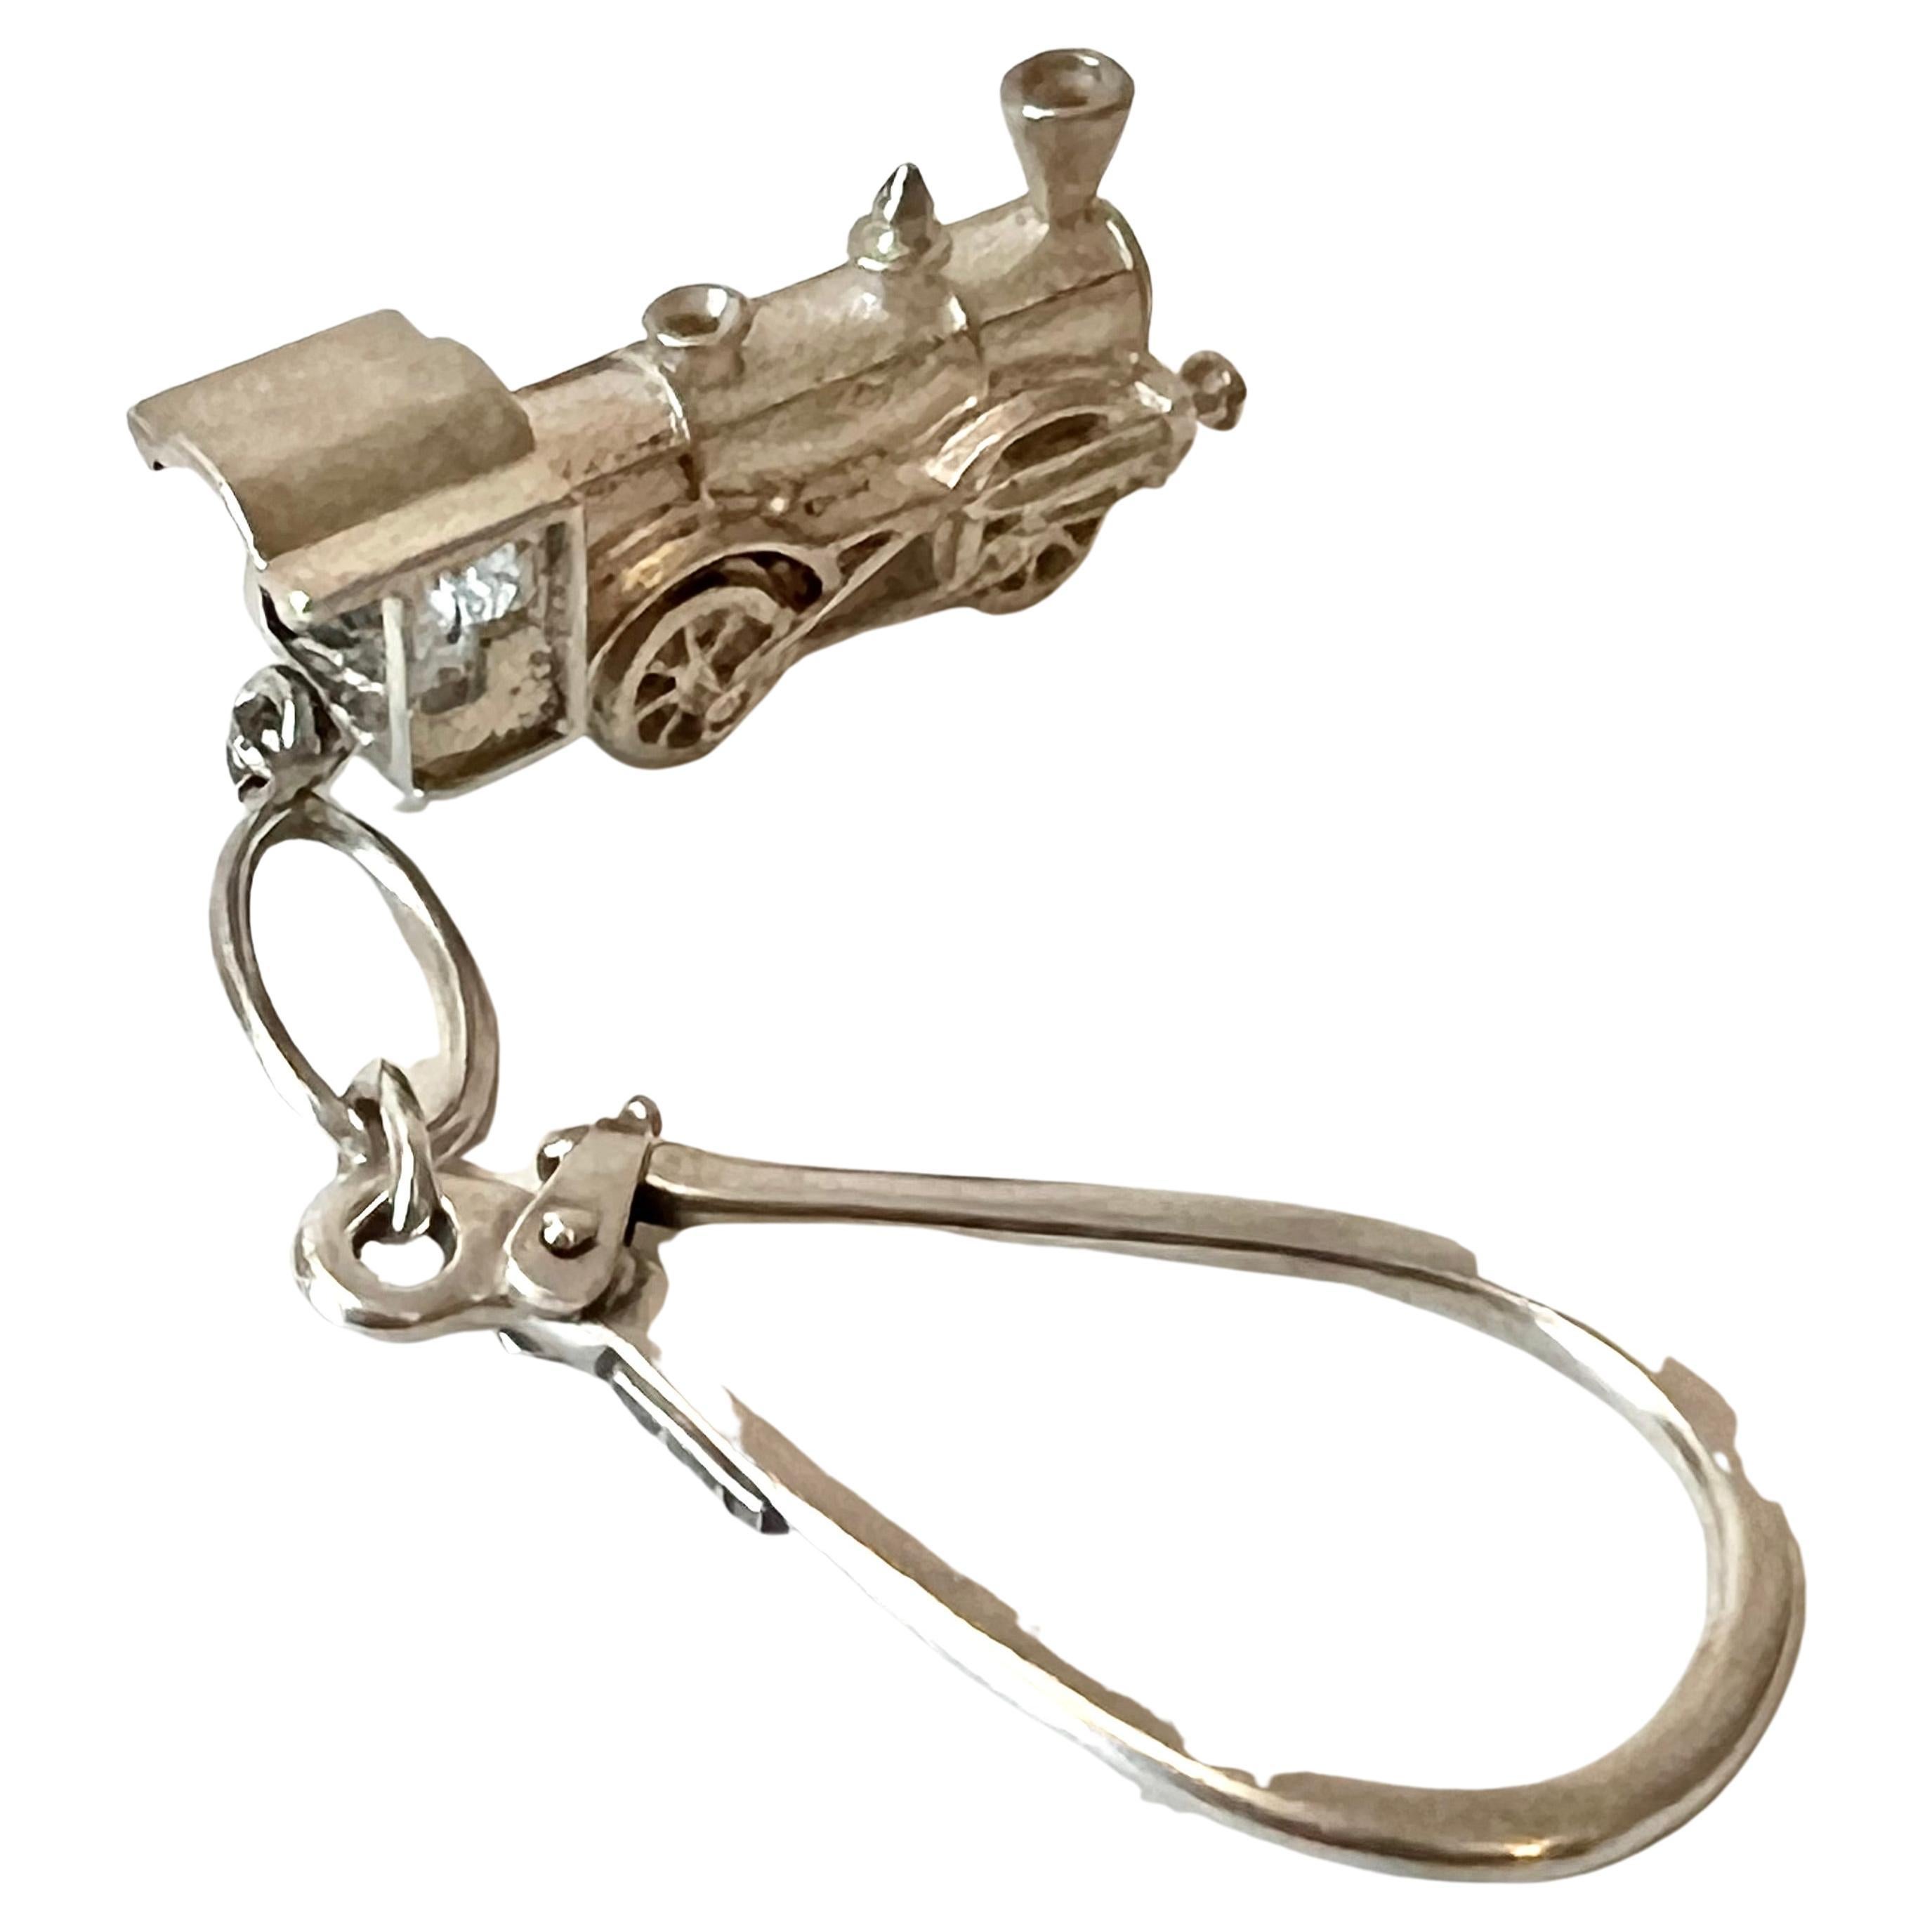 Sterling silver key chain with train or caboose. The key chain looks to be similar to a fine piece, like a Tiffany piece, although it is not.

A large ring with a very secure safety latch to hold keys safely without fail - very nice and wonderful